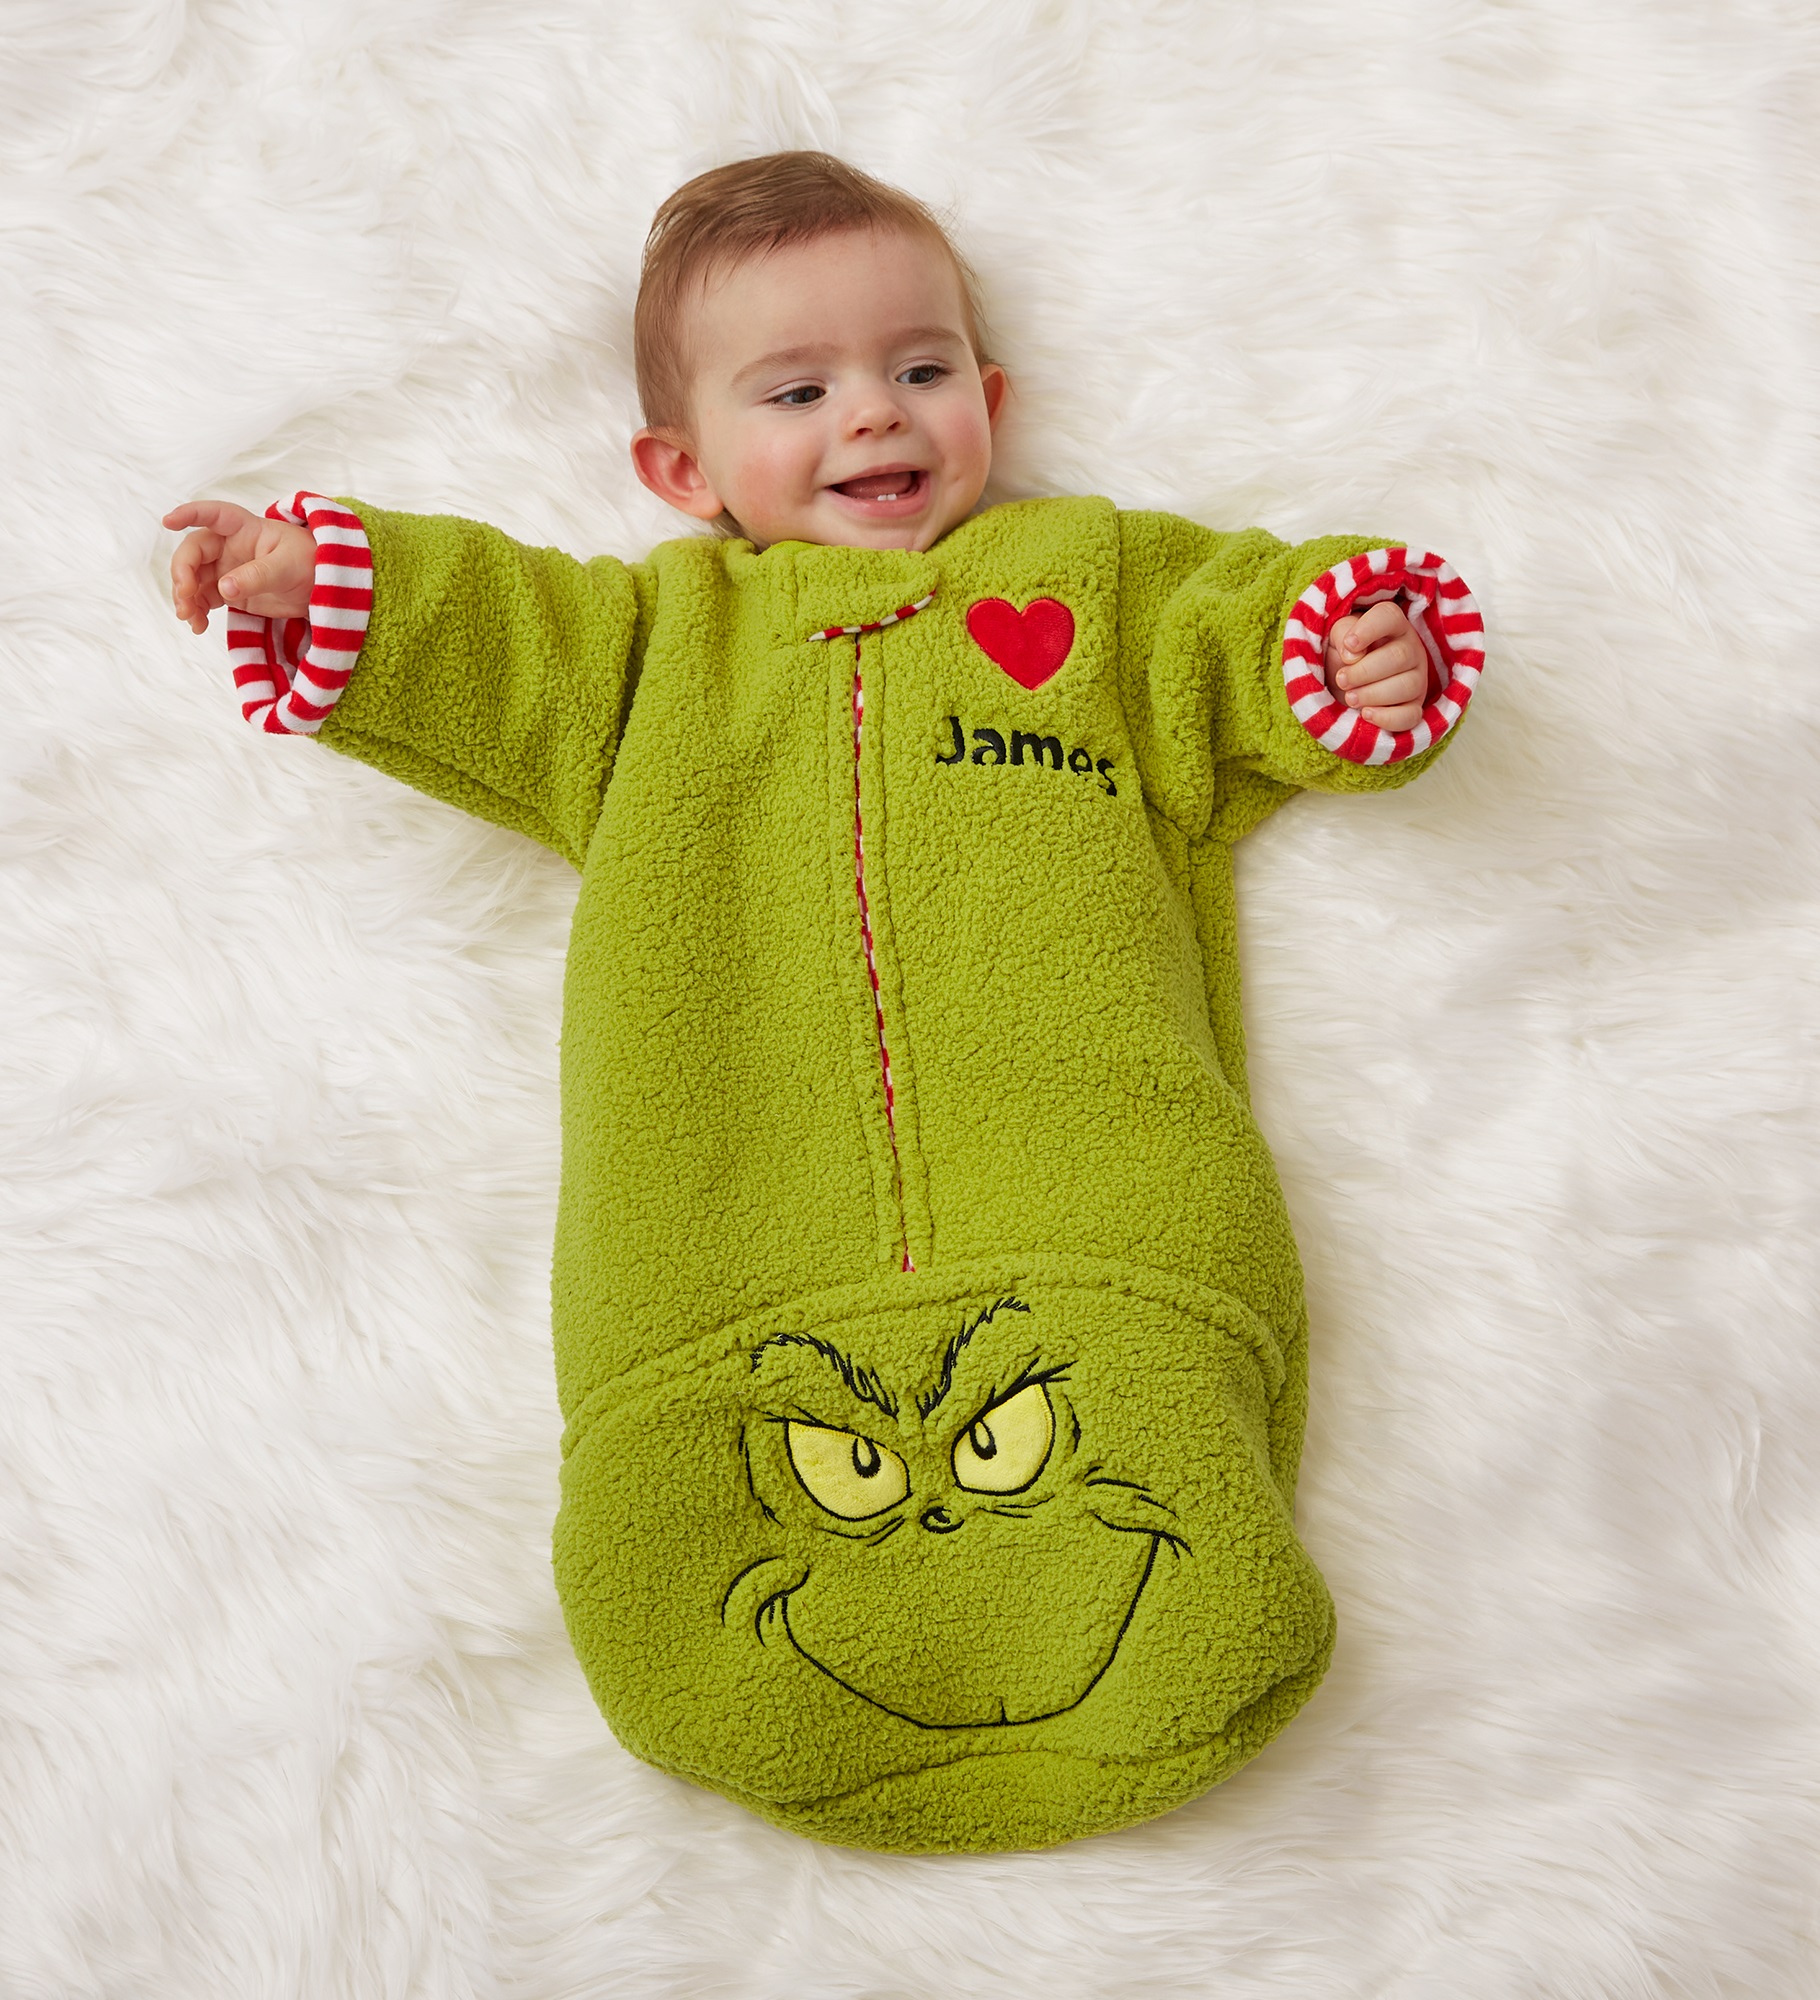 The Grinch Personalized Baby Cozy Bag